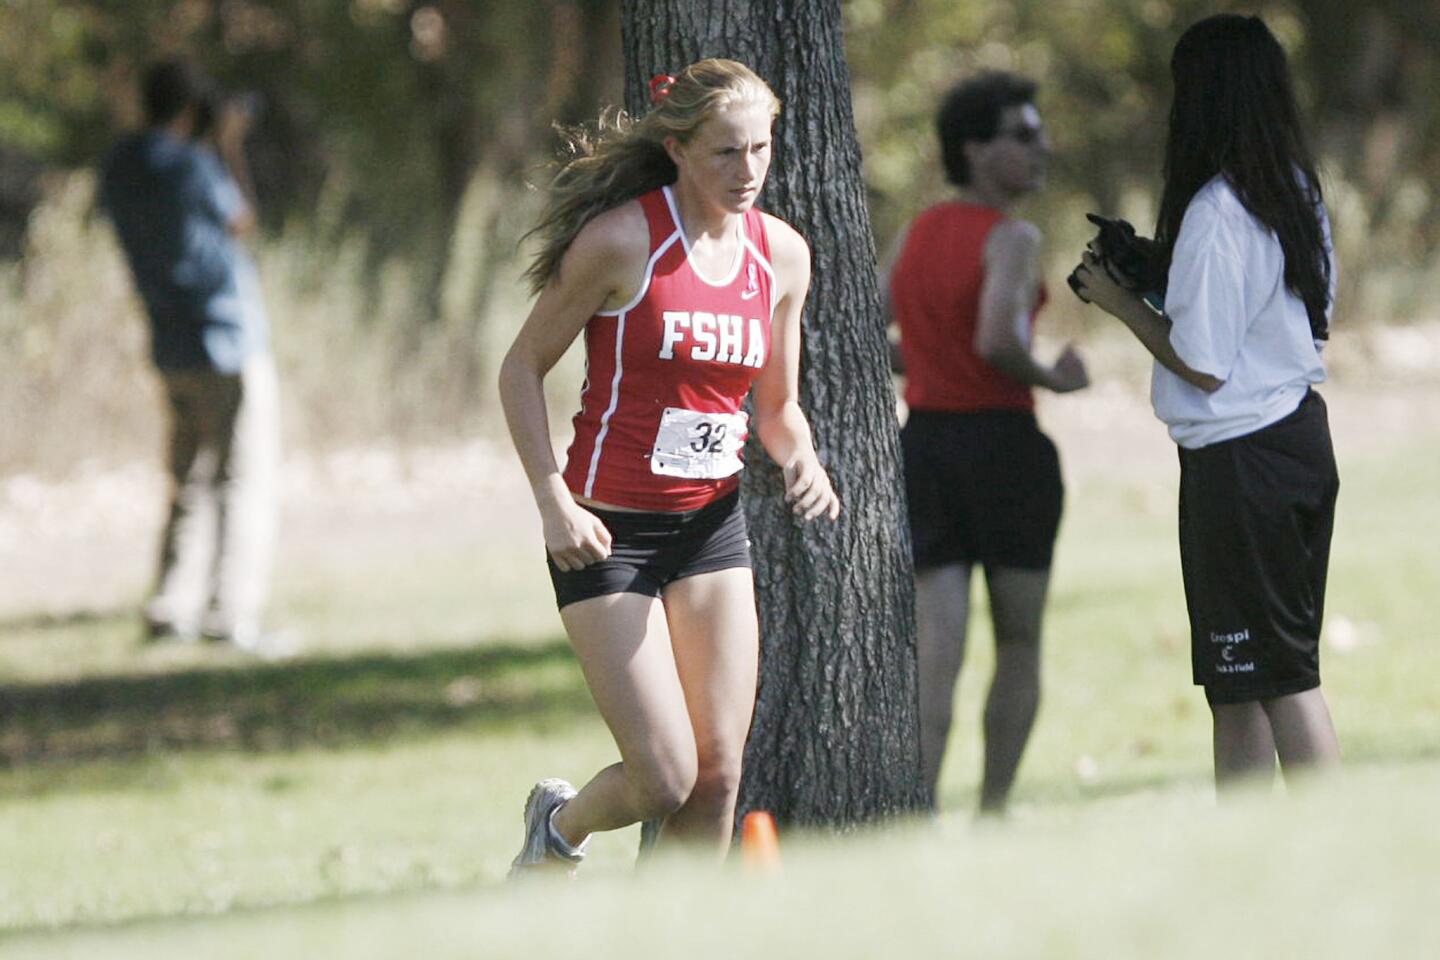 FSHA's Maddie Peterson participates in a meet at Balboa Park in Encino on Thursday, October 4, 2012.